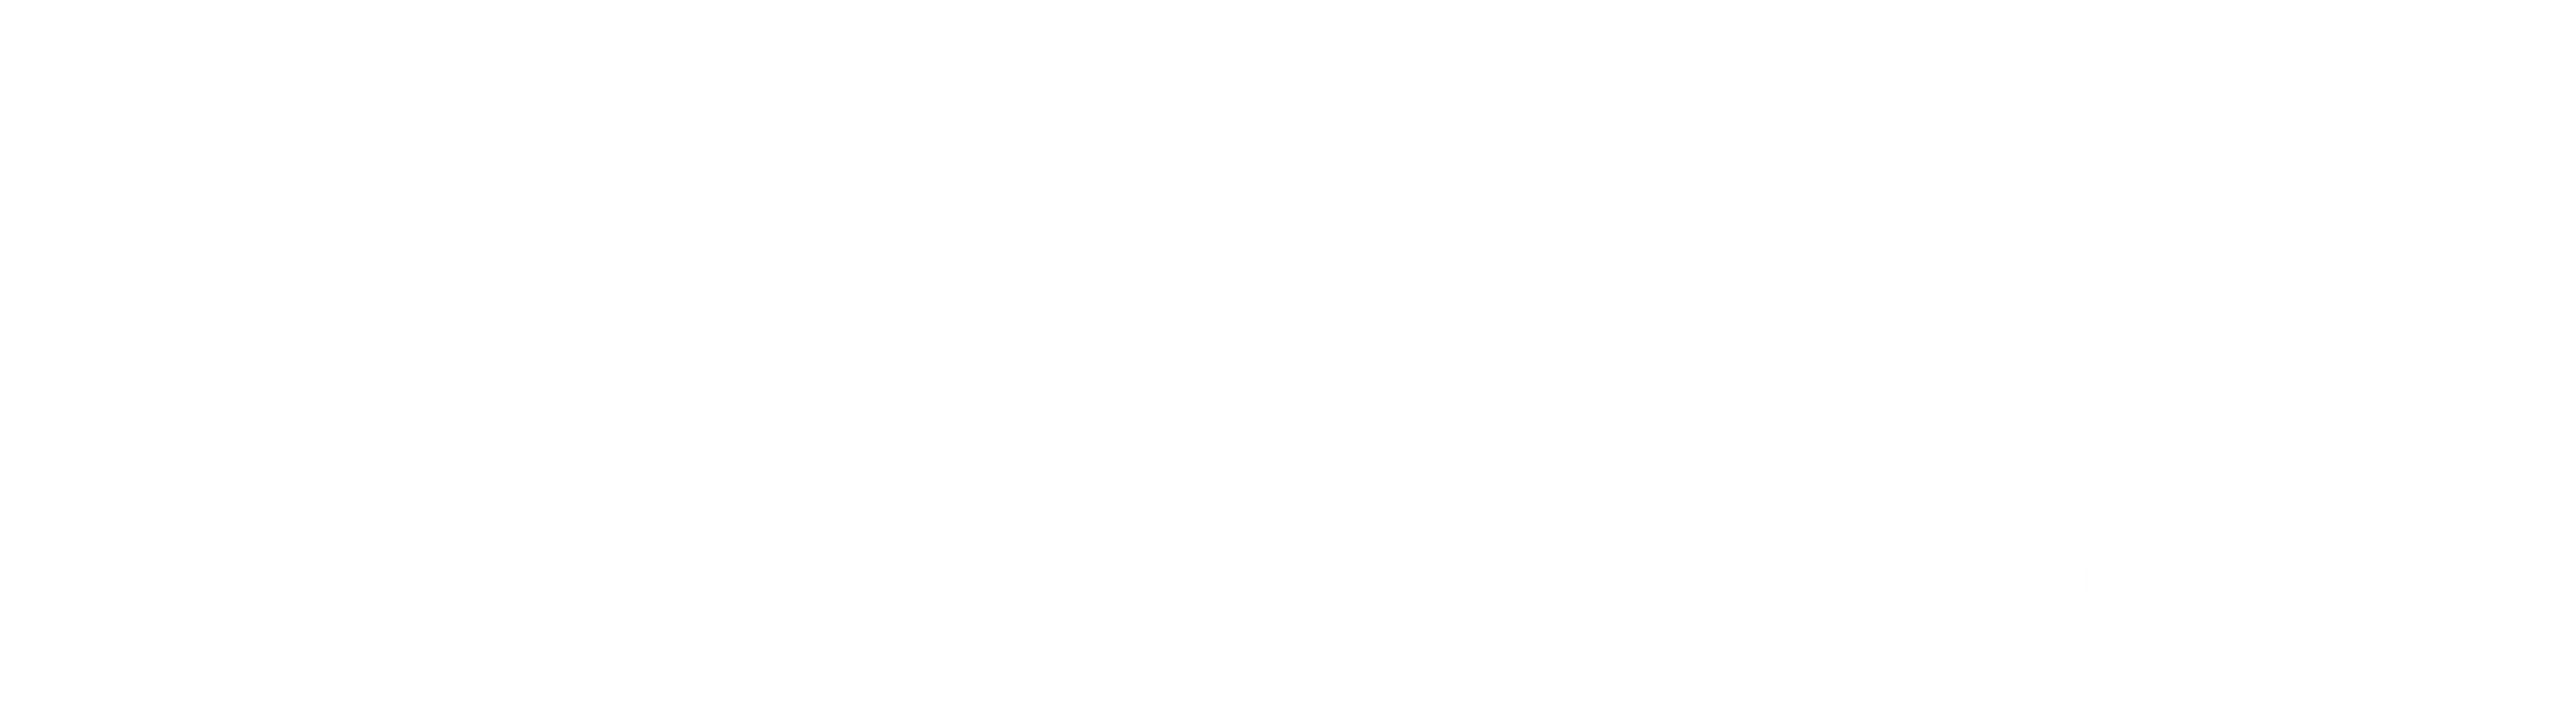 Removals Company Manchester Logo in white